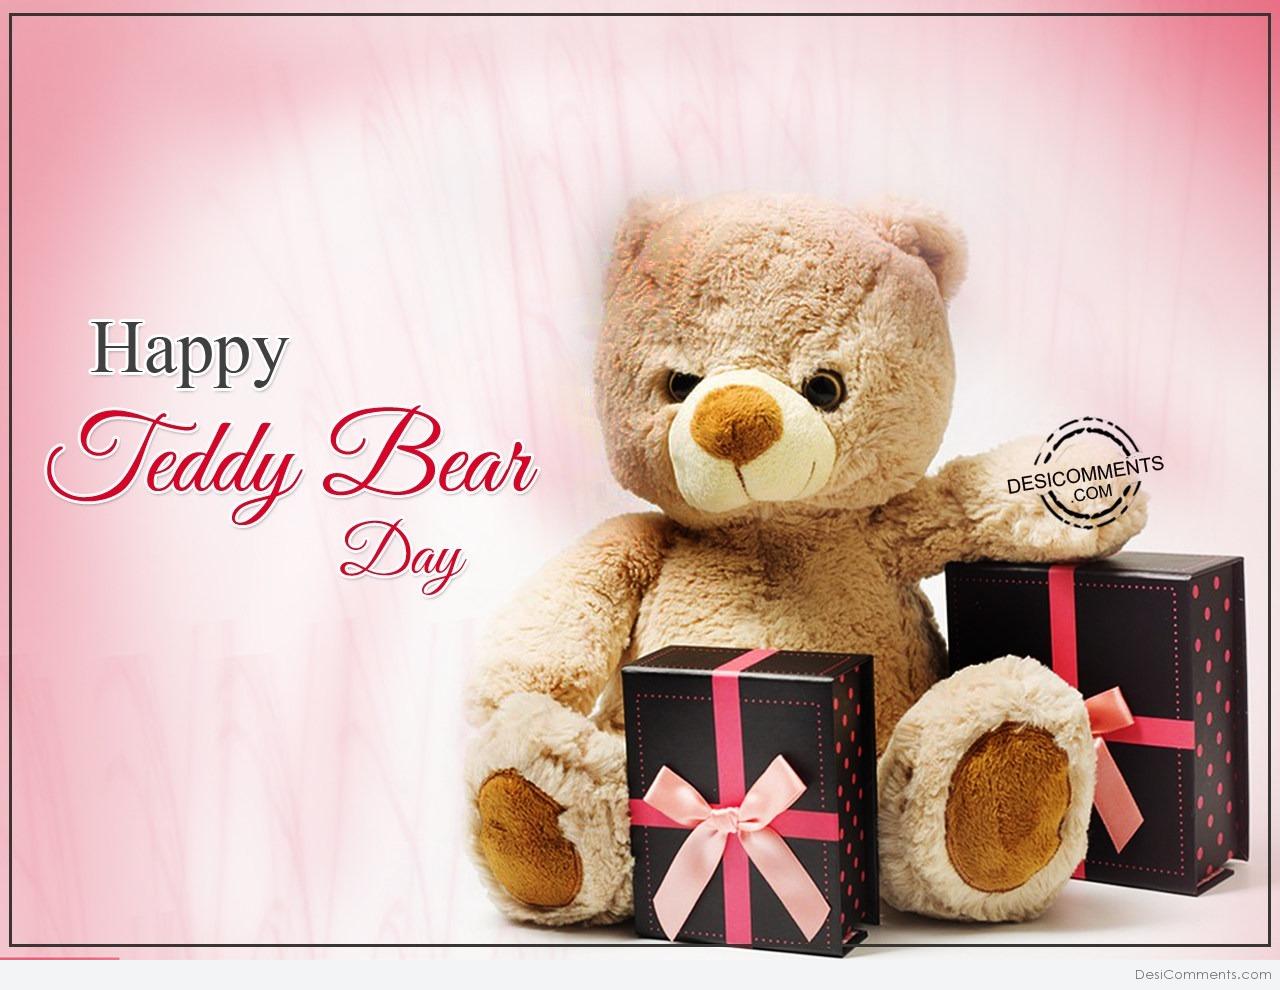 Teddy Bear Day Pictures - Teddy Bear Day Pictures, Images, Graphics For ...